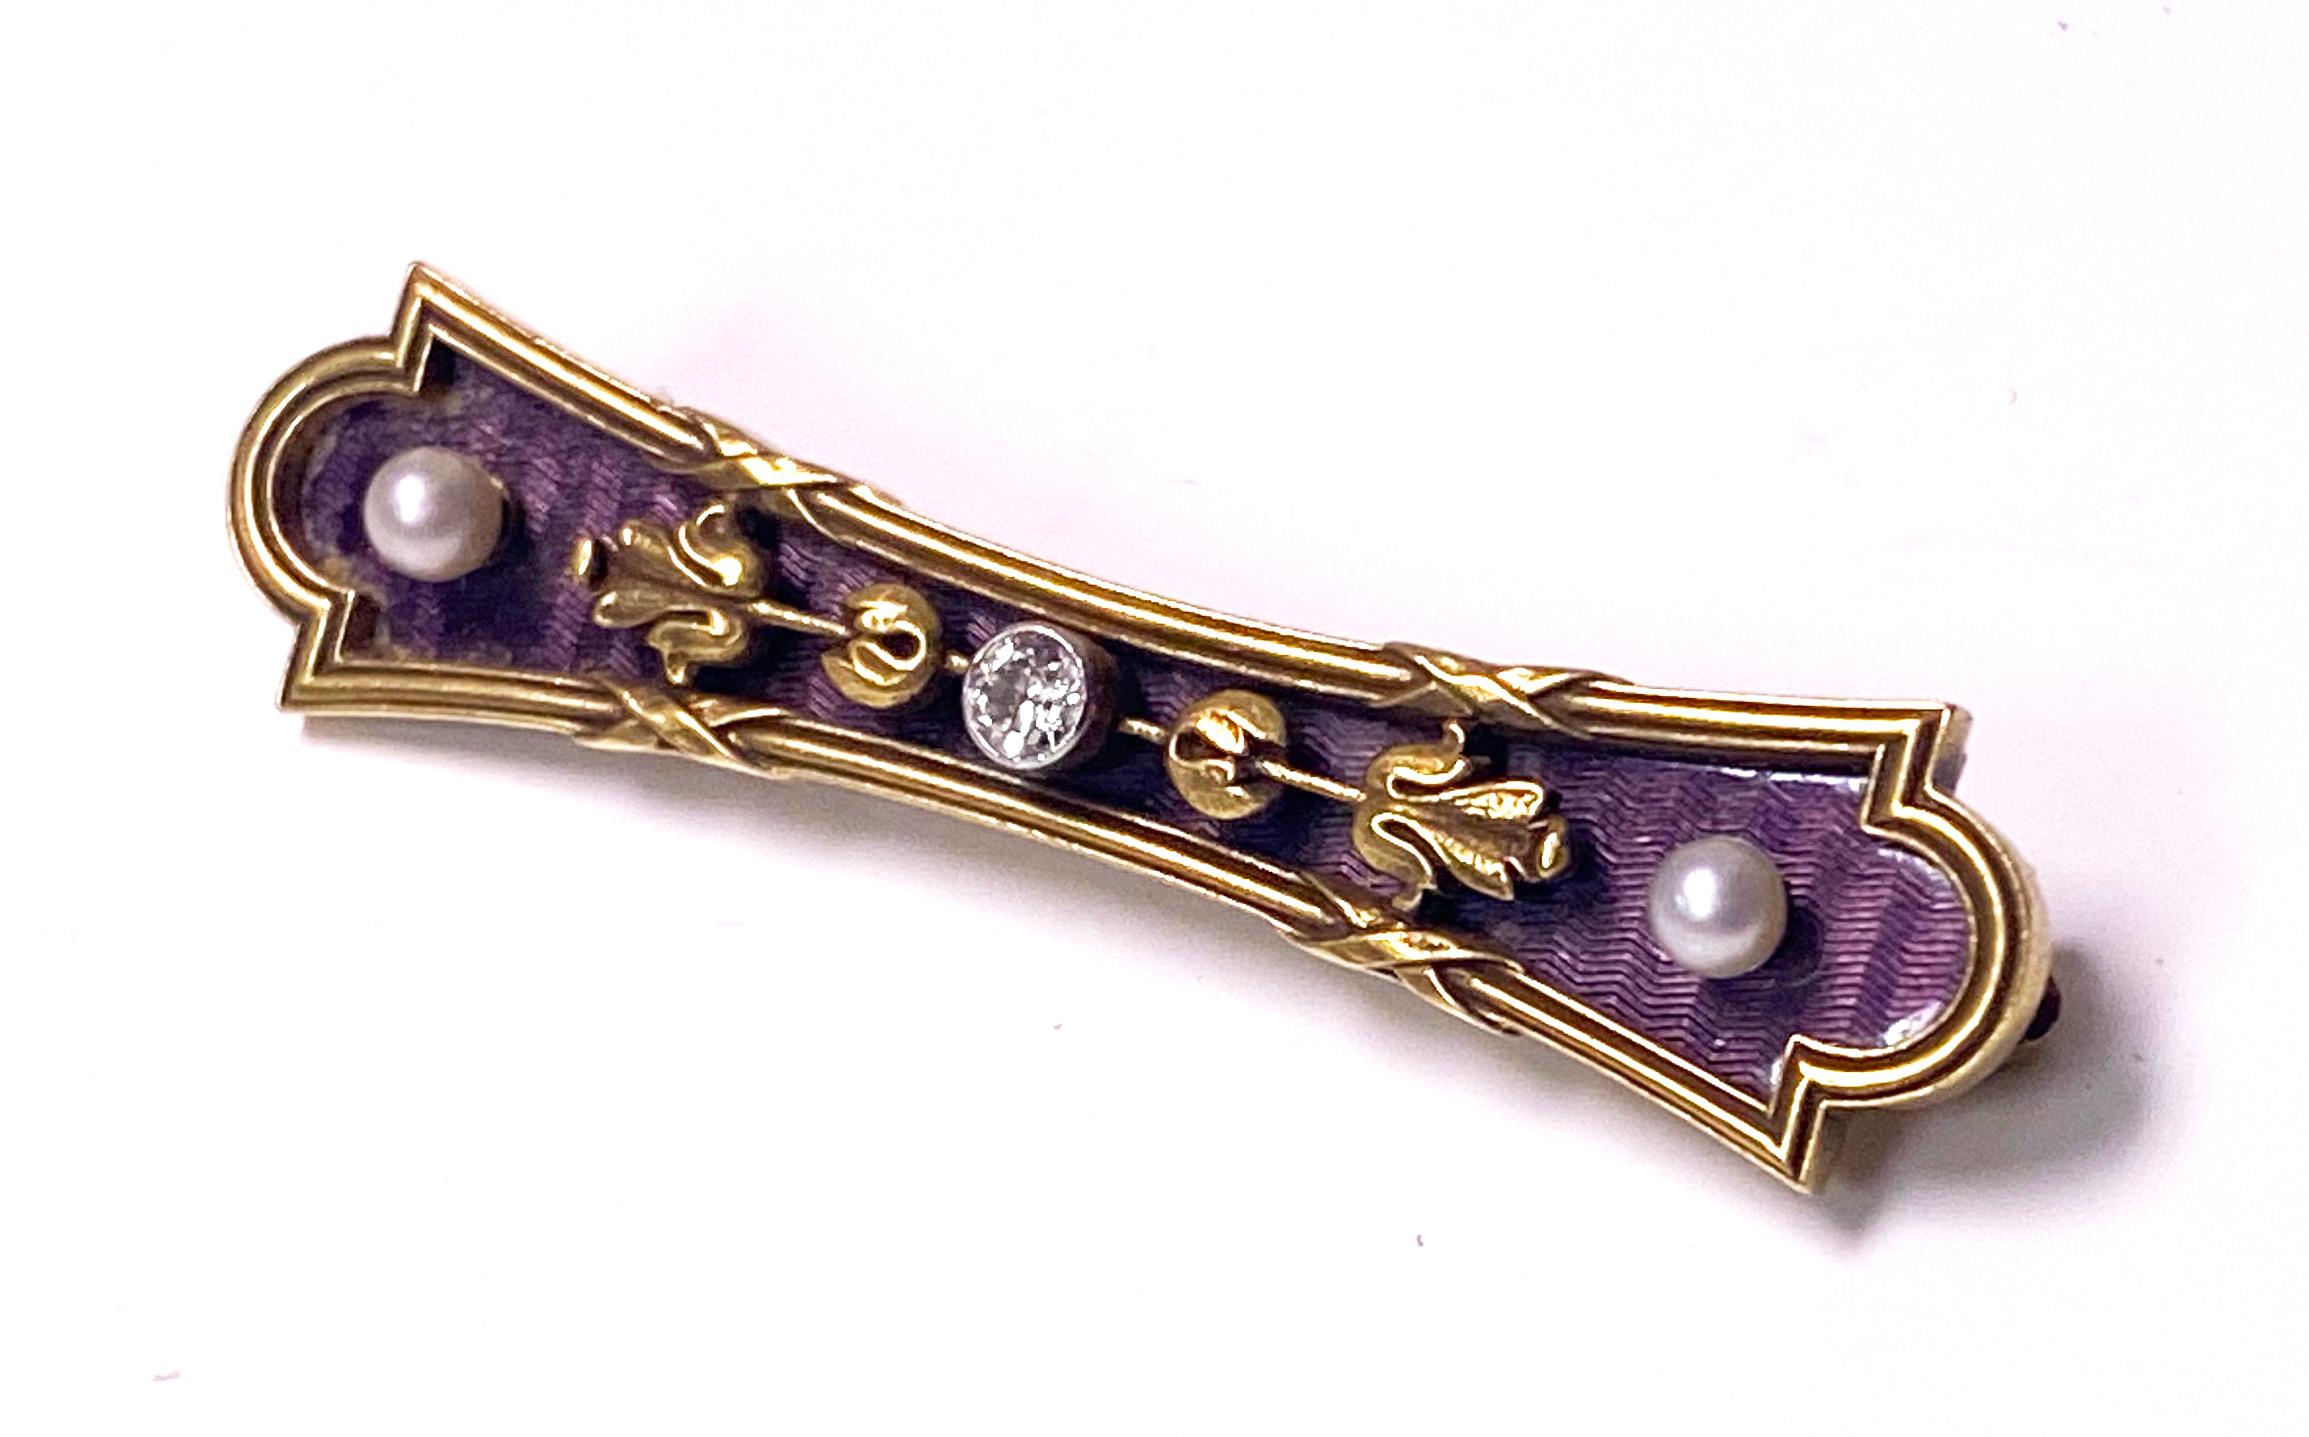 Antique Gold Diamond Pearl Enamel Bar brooch C.1890. The brooch of elongated shape set in the centre with a small old cut diamond accented at the end with a small, small applied floral gold decoration all on mauve guilloche enamel.  Pin and safety